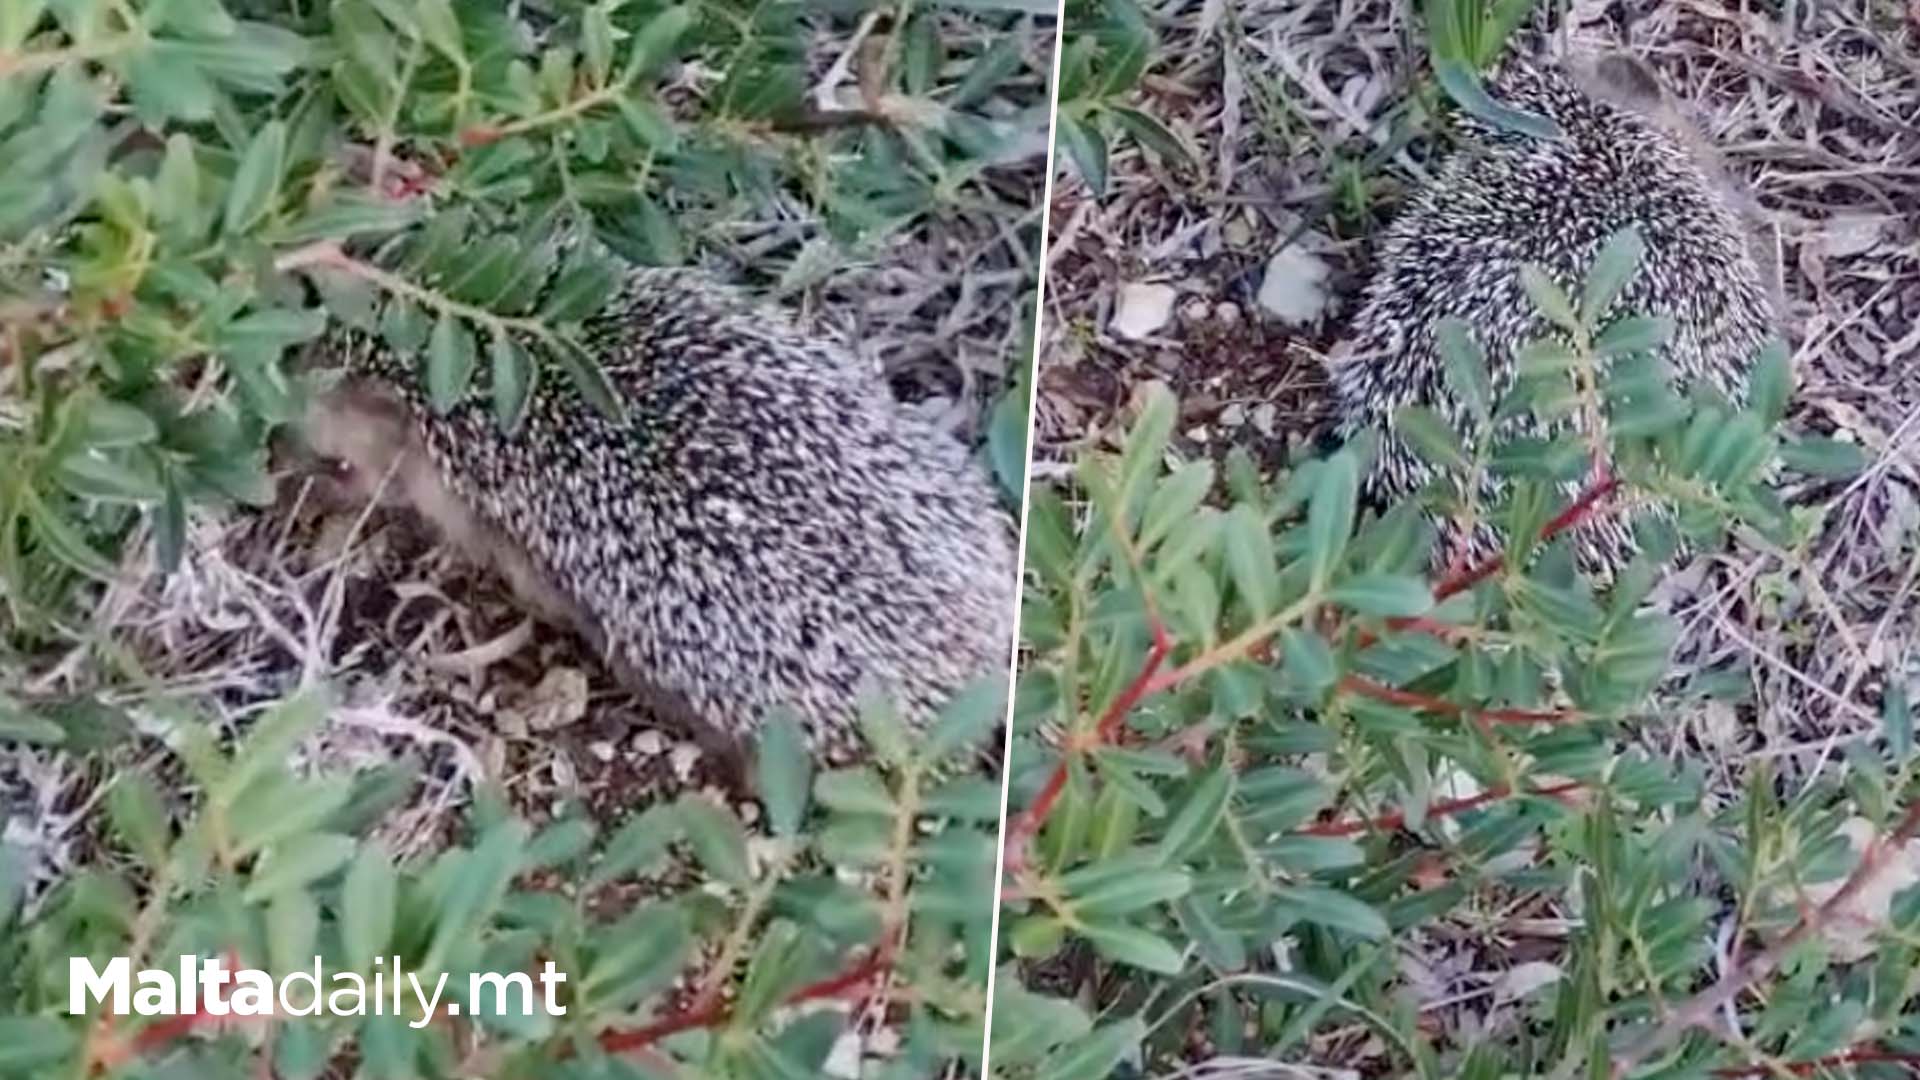 Rescued Hedgehogs Released Back Into The Wild